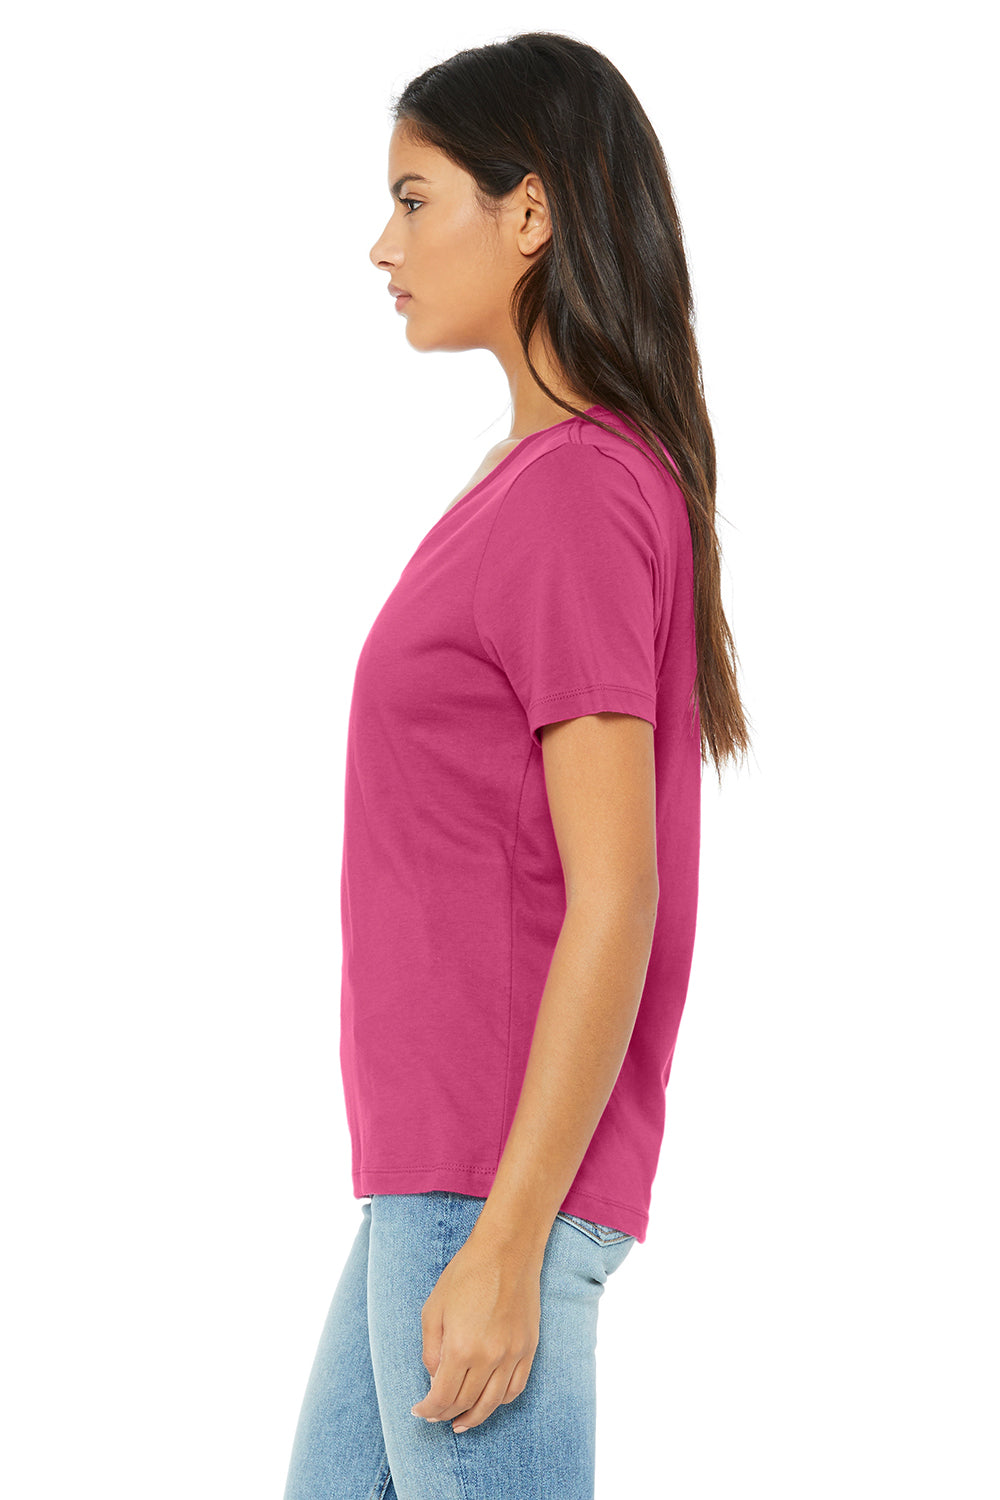 Bella + Canvas BC6405/6405 Womens Relaxed Jersey Short Sleeve V-Neck T-Shirt Berry Pink Model Side